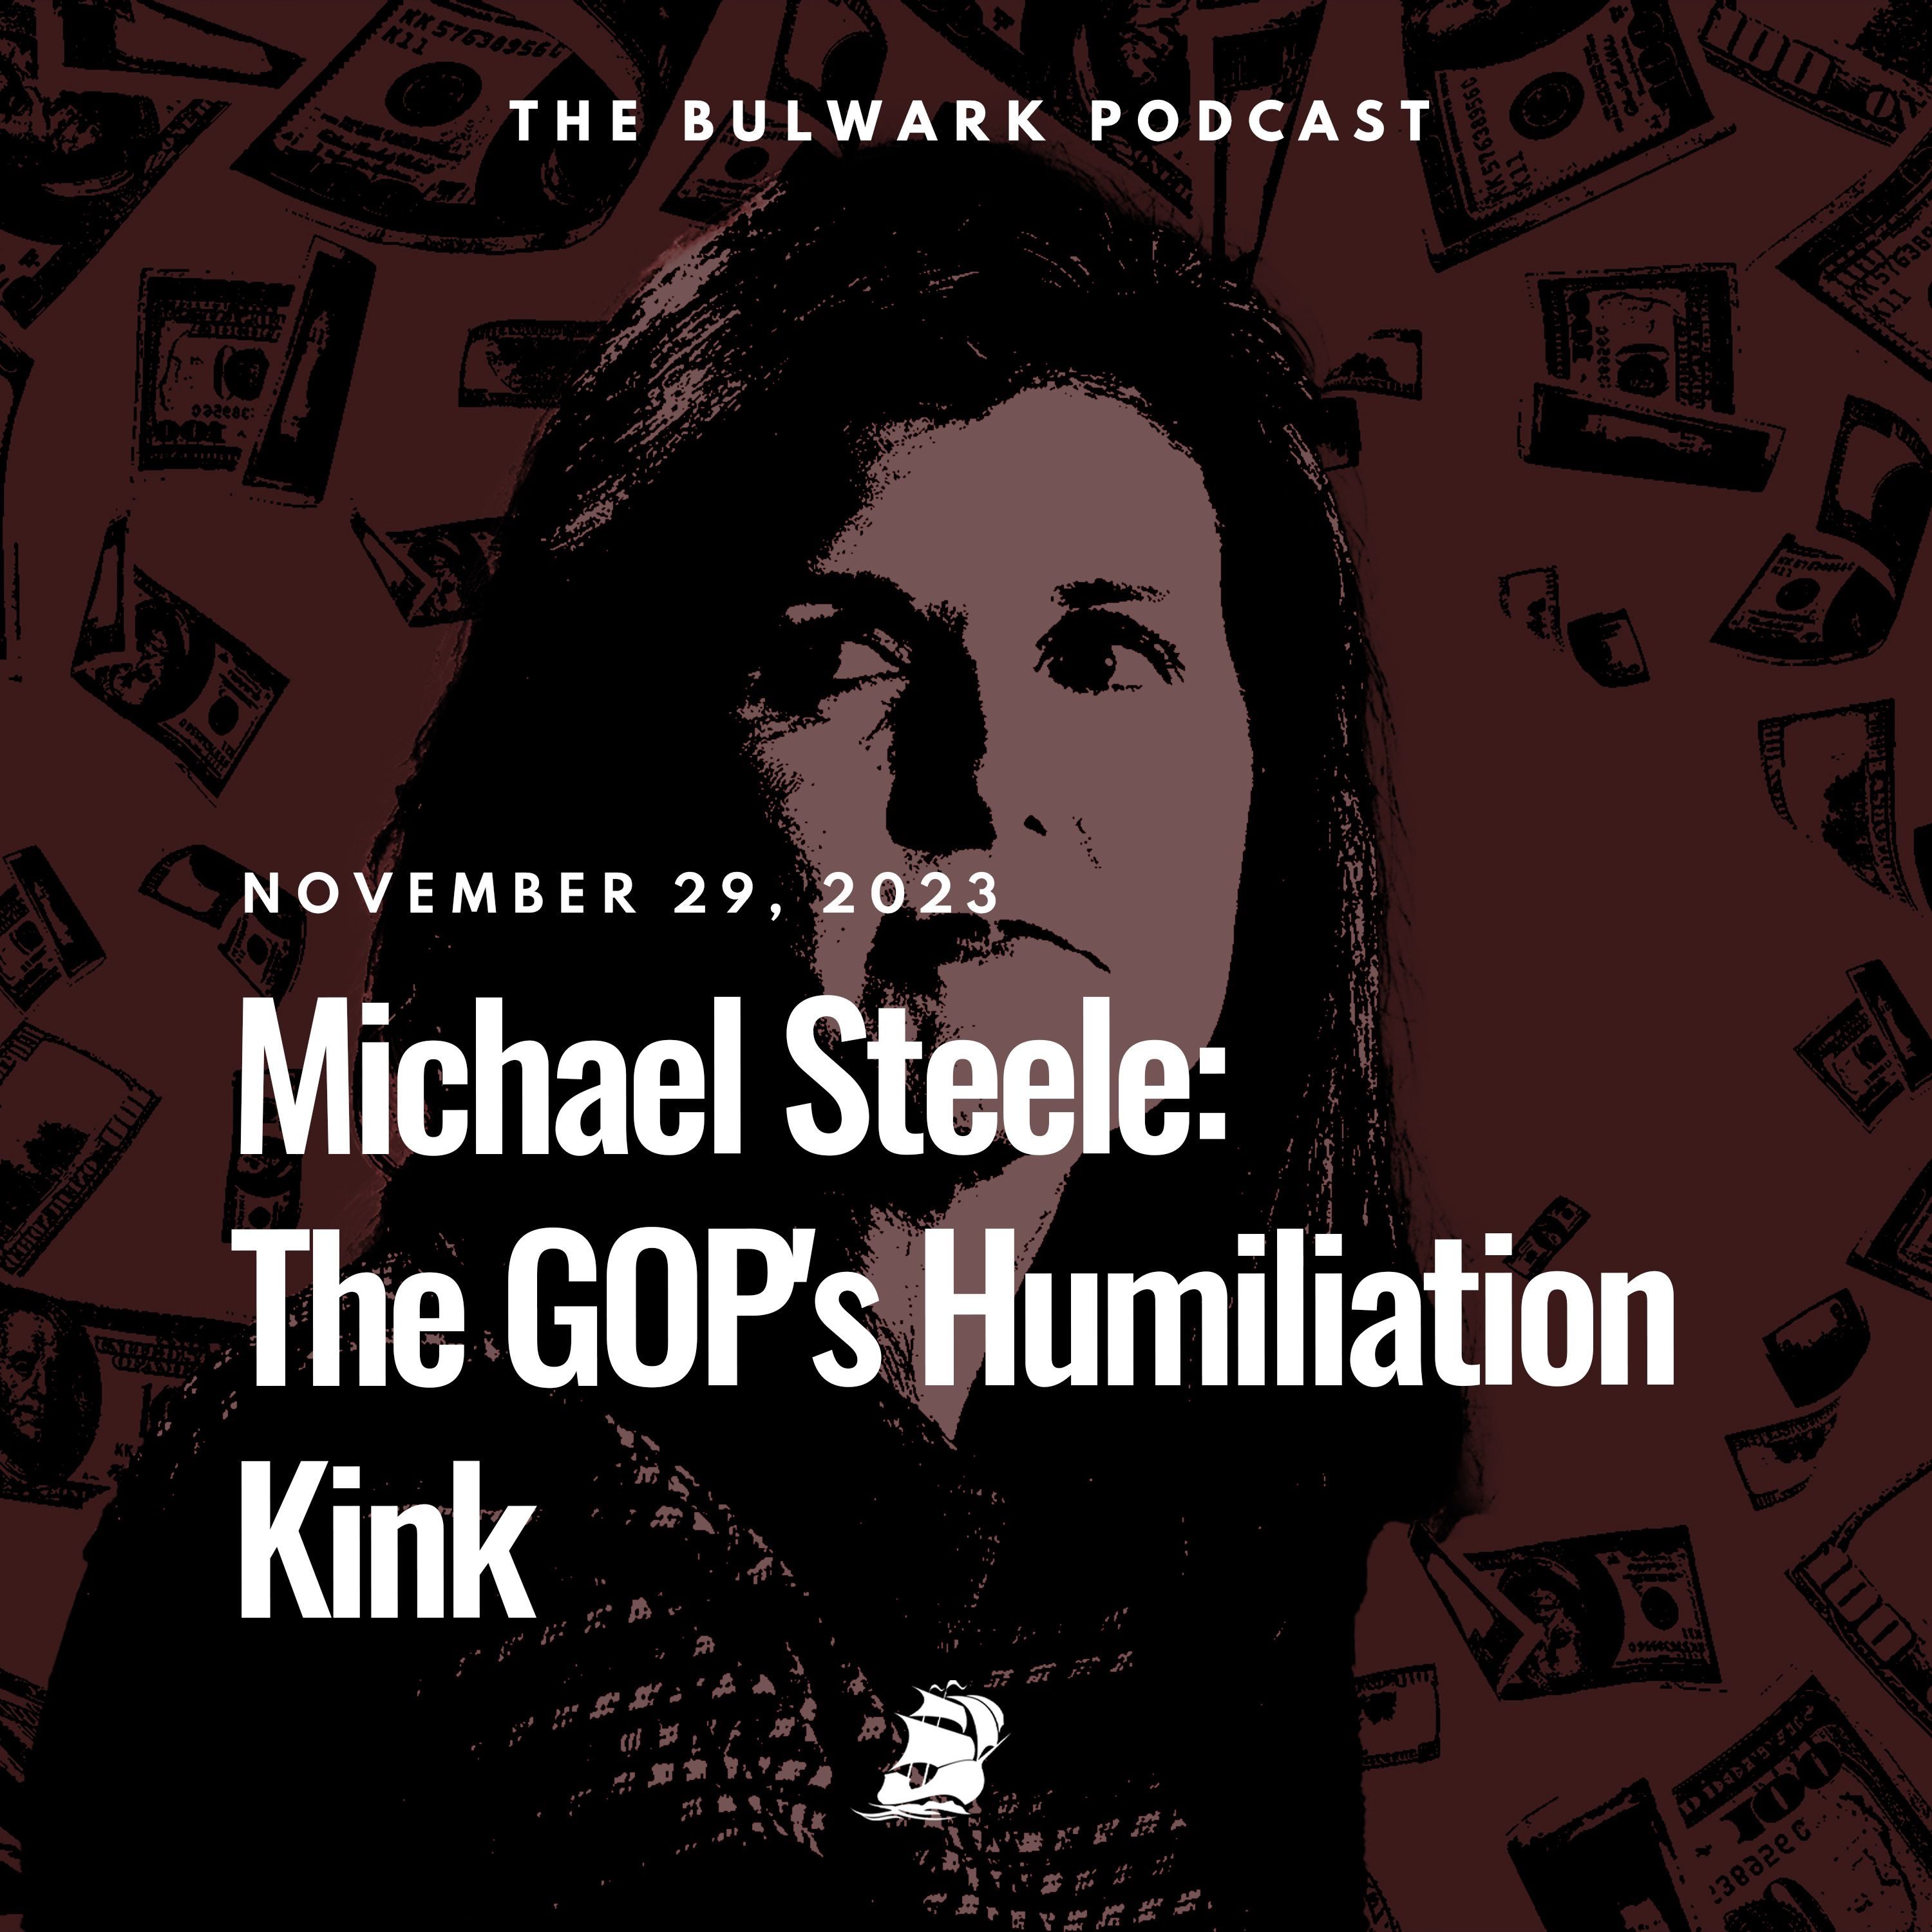 Michael Steele: The GOP's Humiliation Kink by The Bulwark Podcast